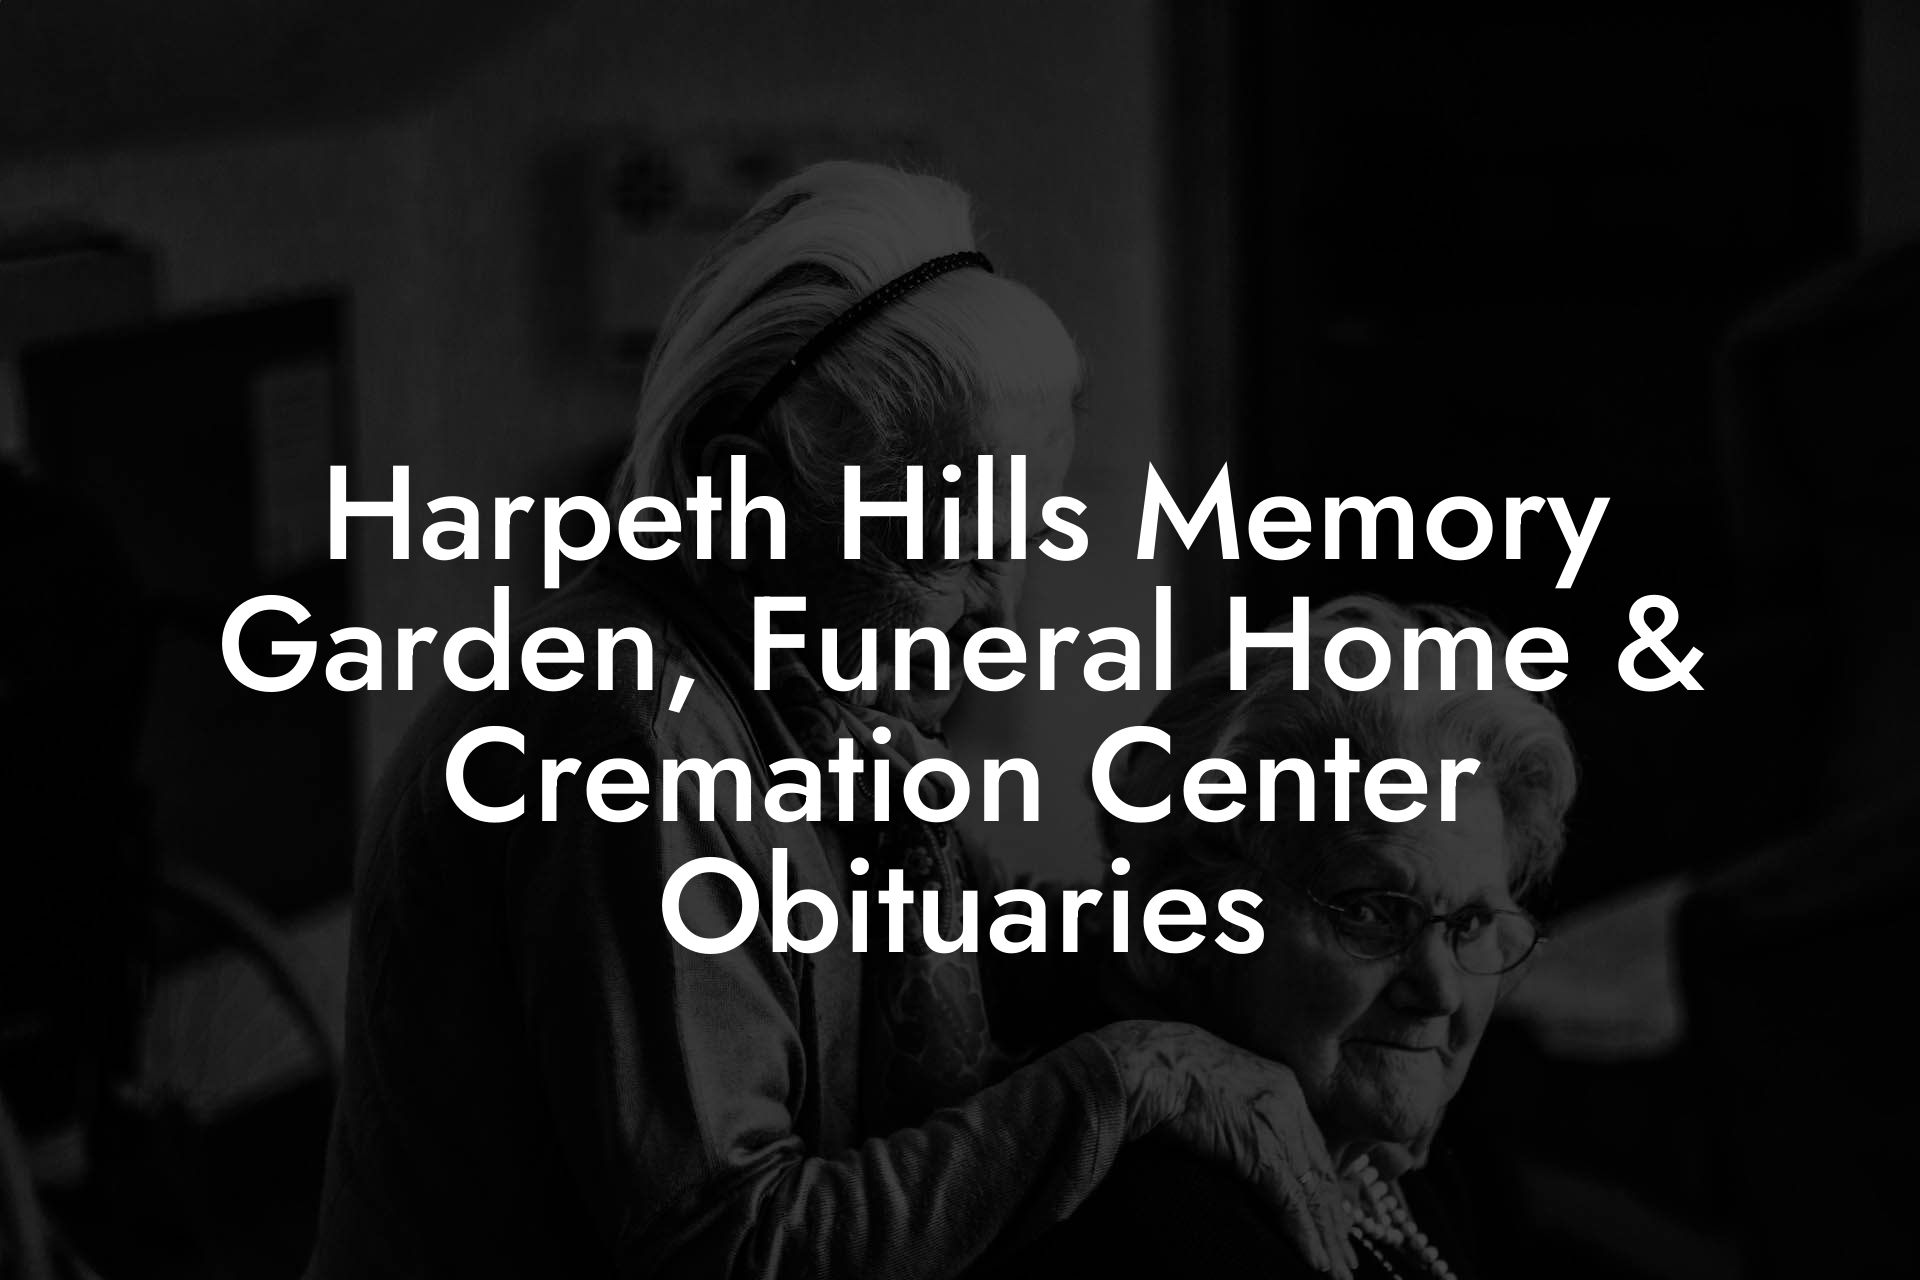 Harpeth Hills Memory Garden, Funeral Home & Cremation Center Obituaries